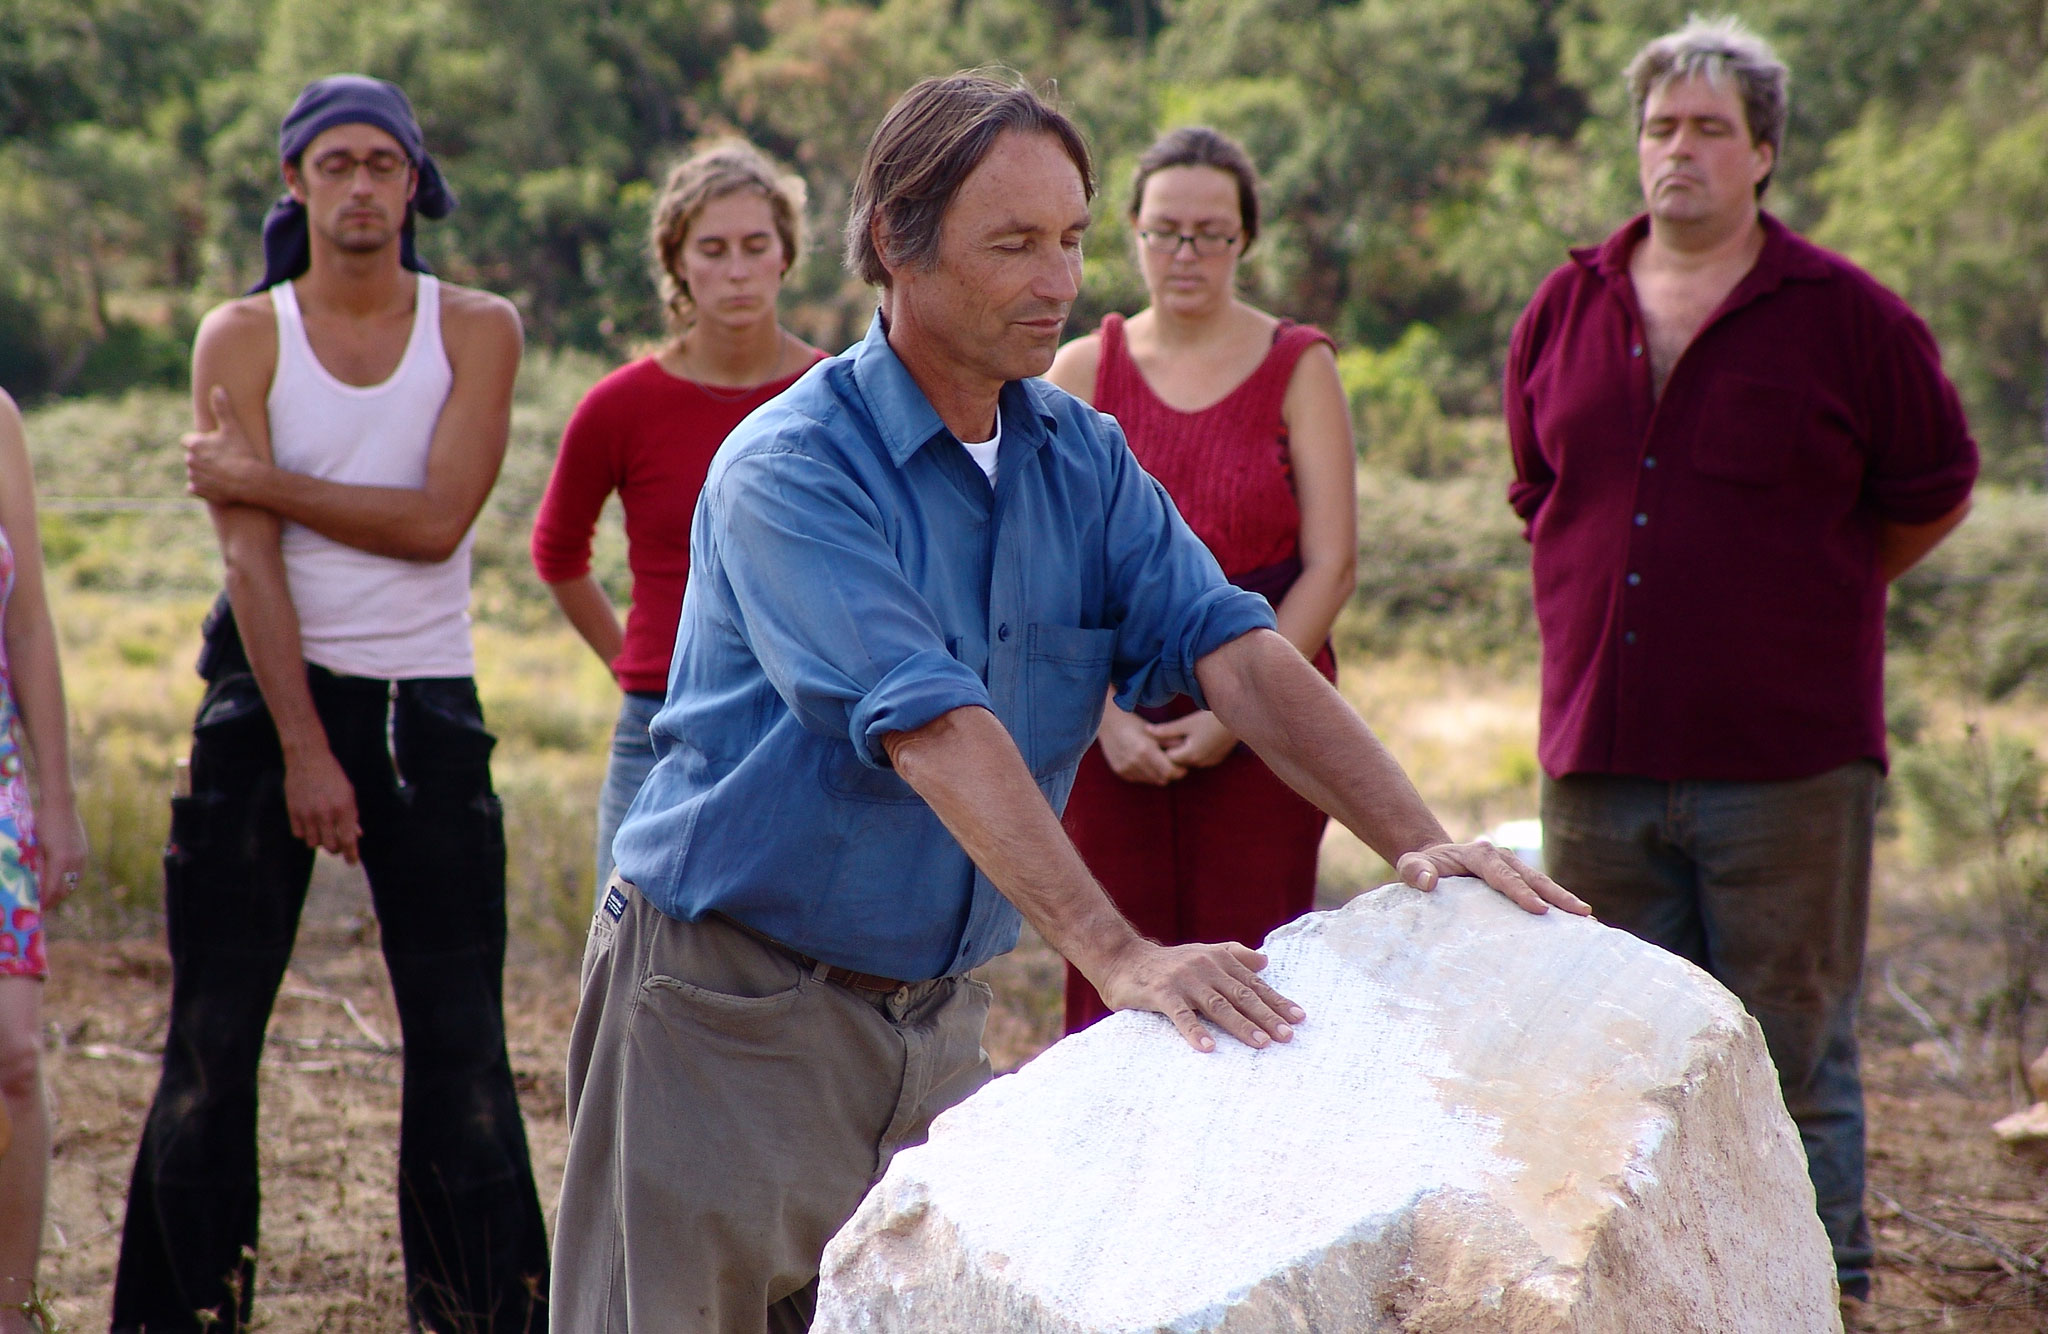 Marco Pogacnik, Geomancer and Cooperation Partner for the Construction of the Stone Circle